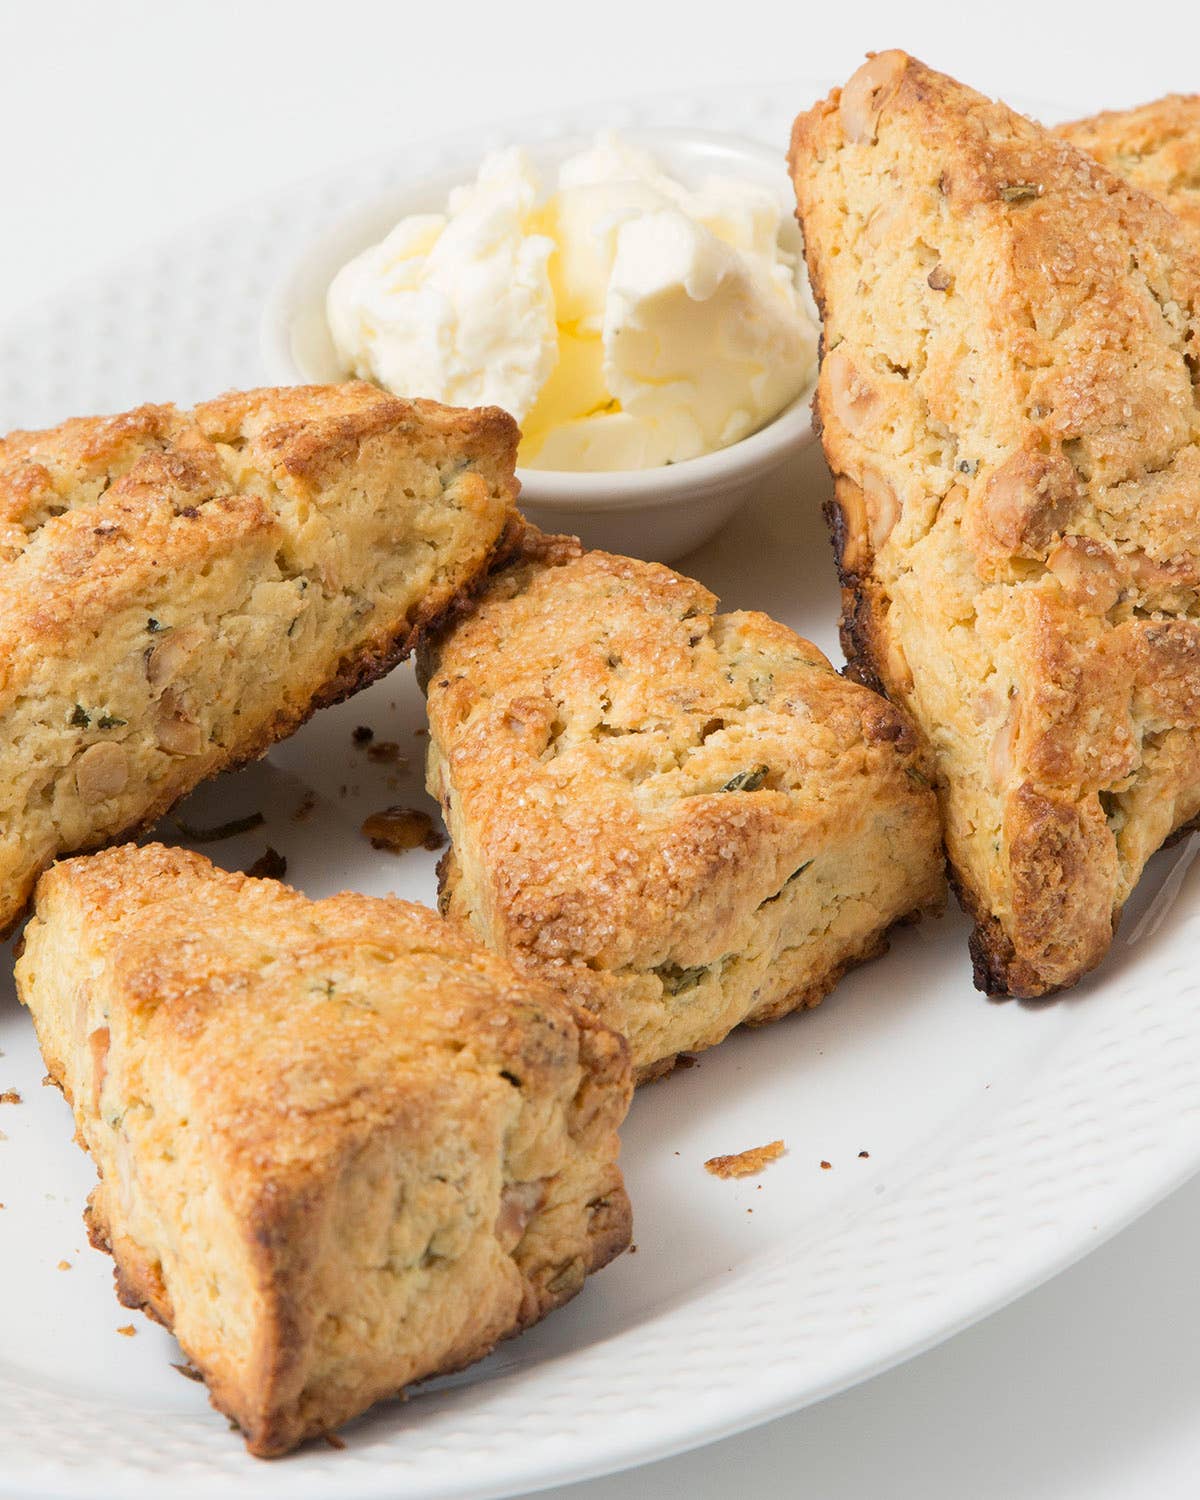 Honeycomb-Einkorn Scones with Hazelnuts and Rosemary